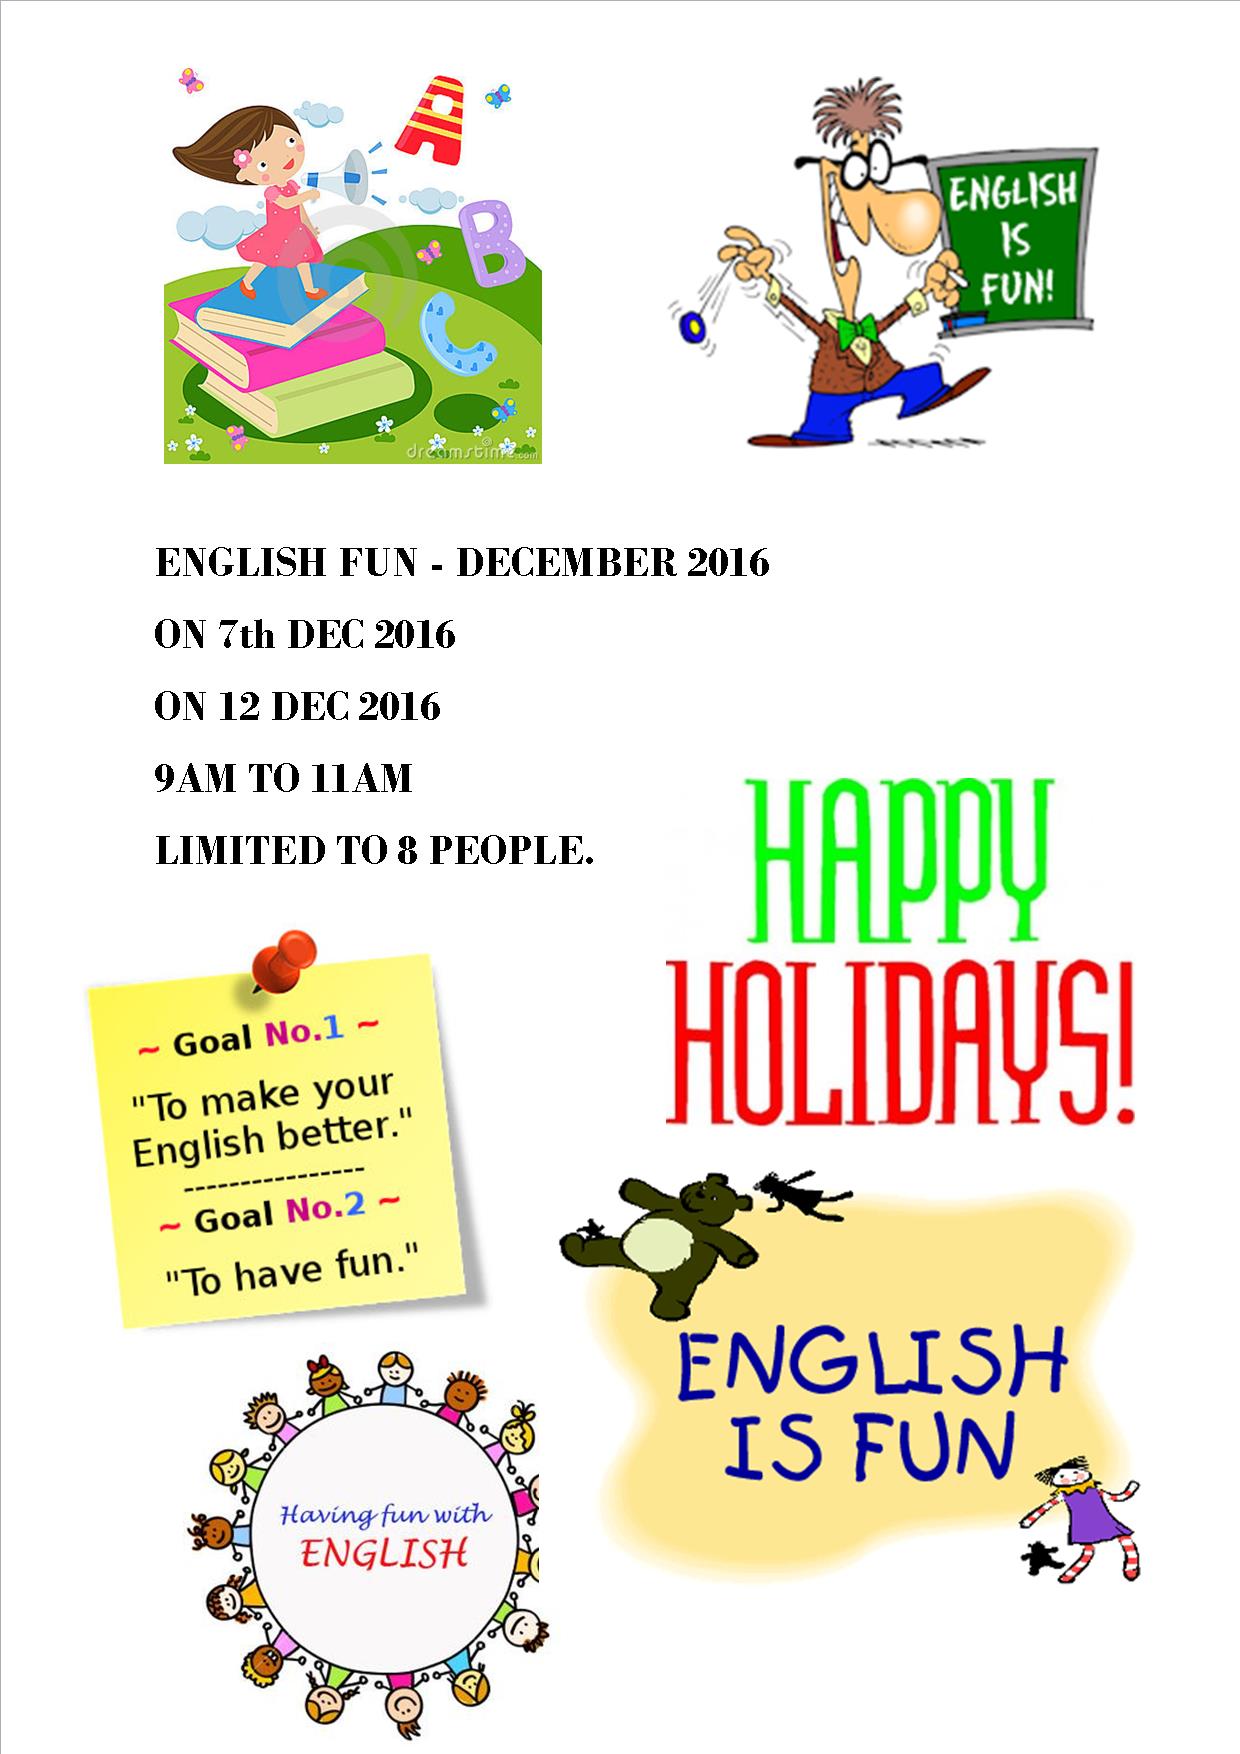 FUN WITH ENGLISH - DECEMBER HOLIDAY PROGRAM in Sungai Dua Penang by JC Learning